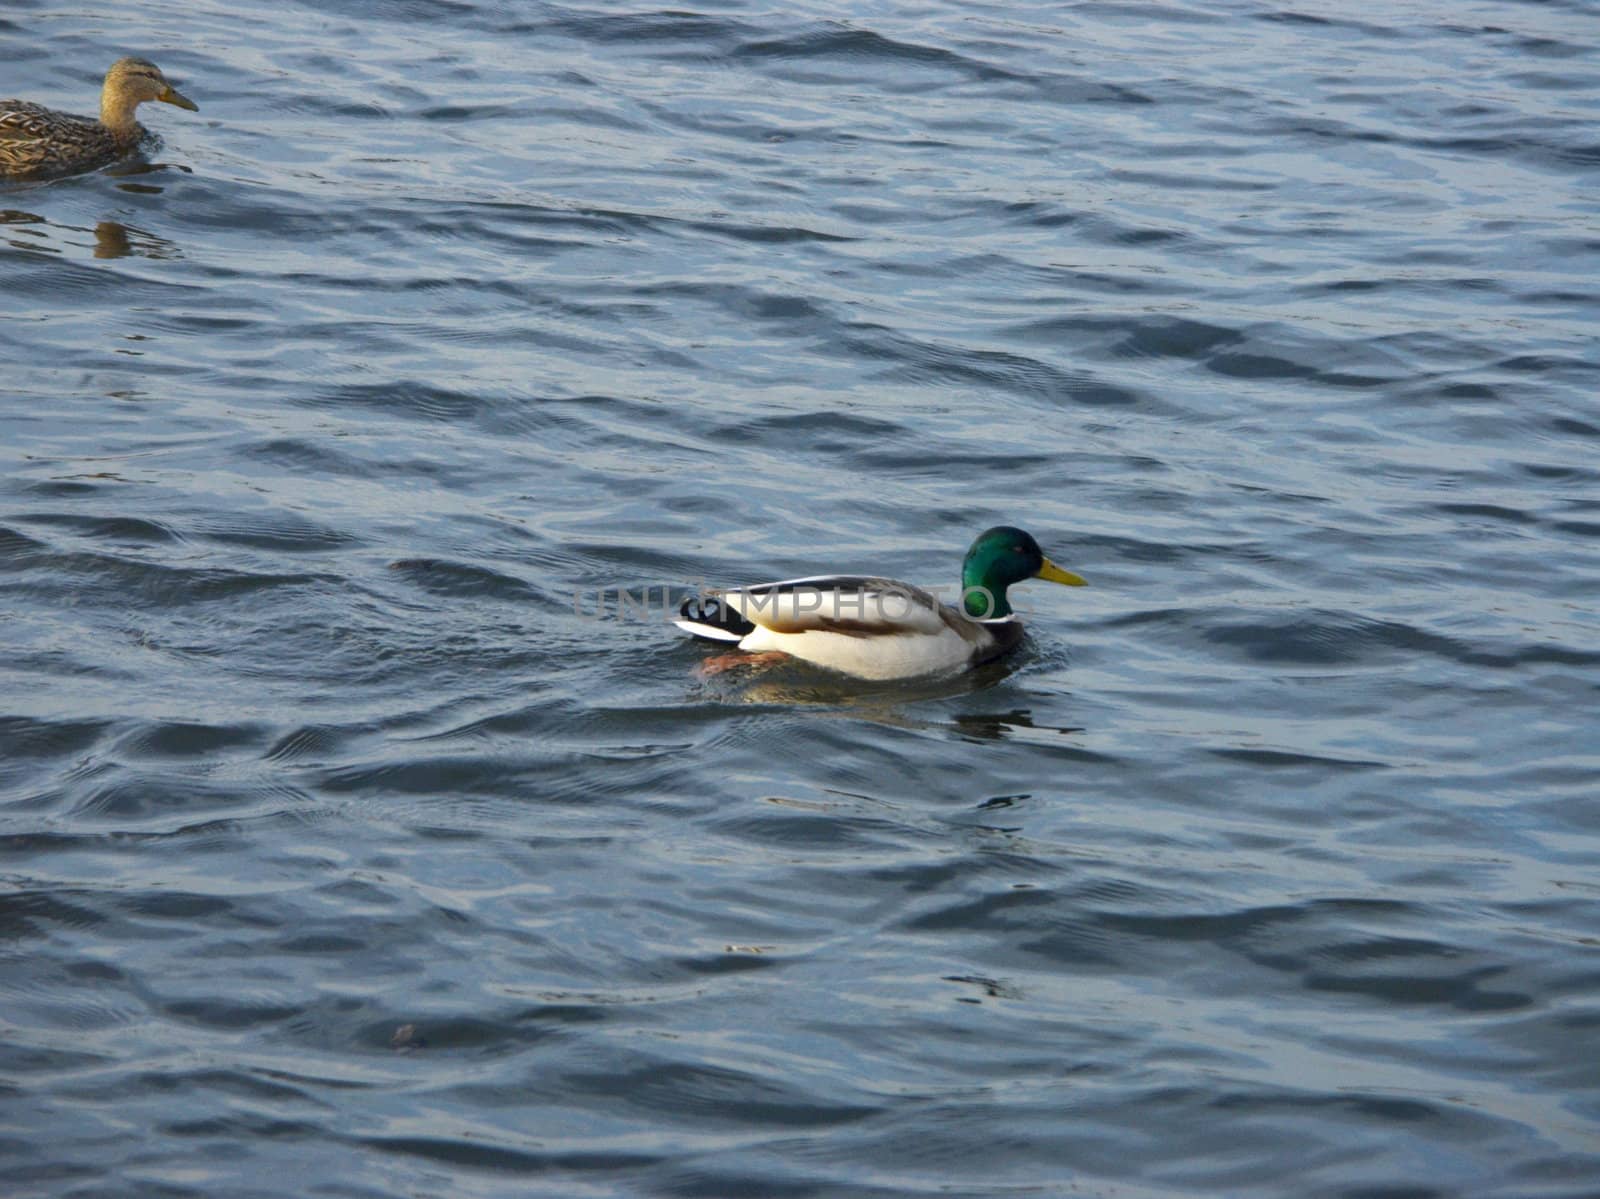 The image of the duck floating on water